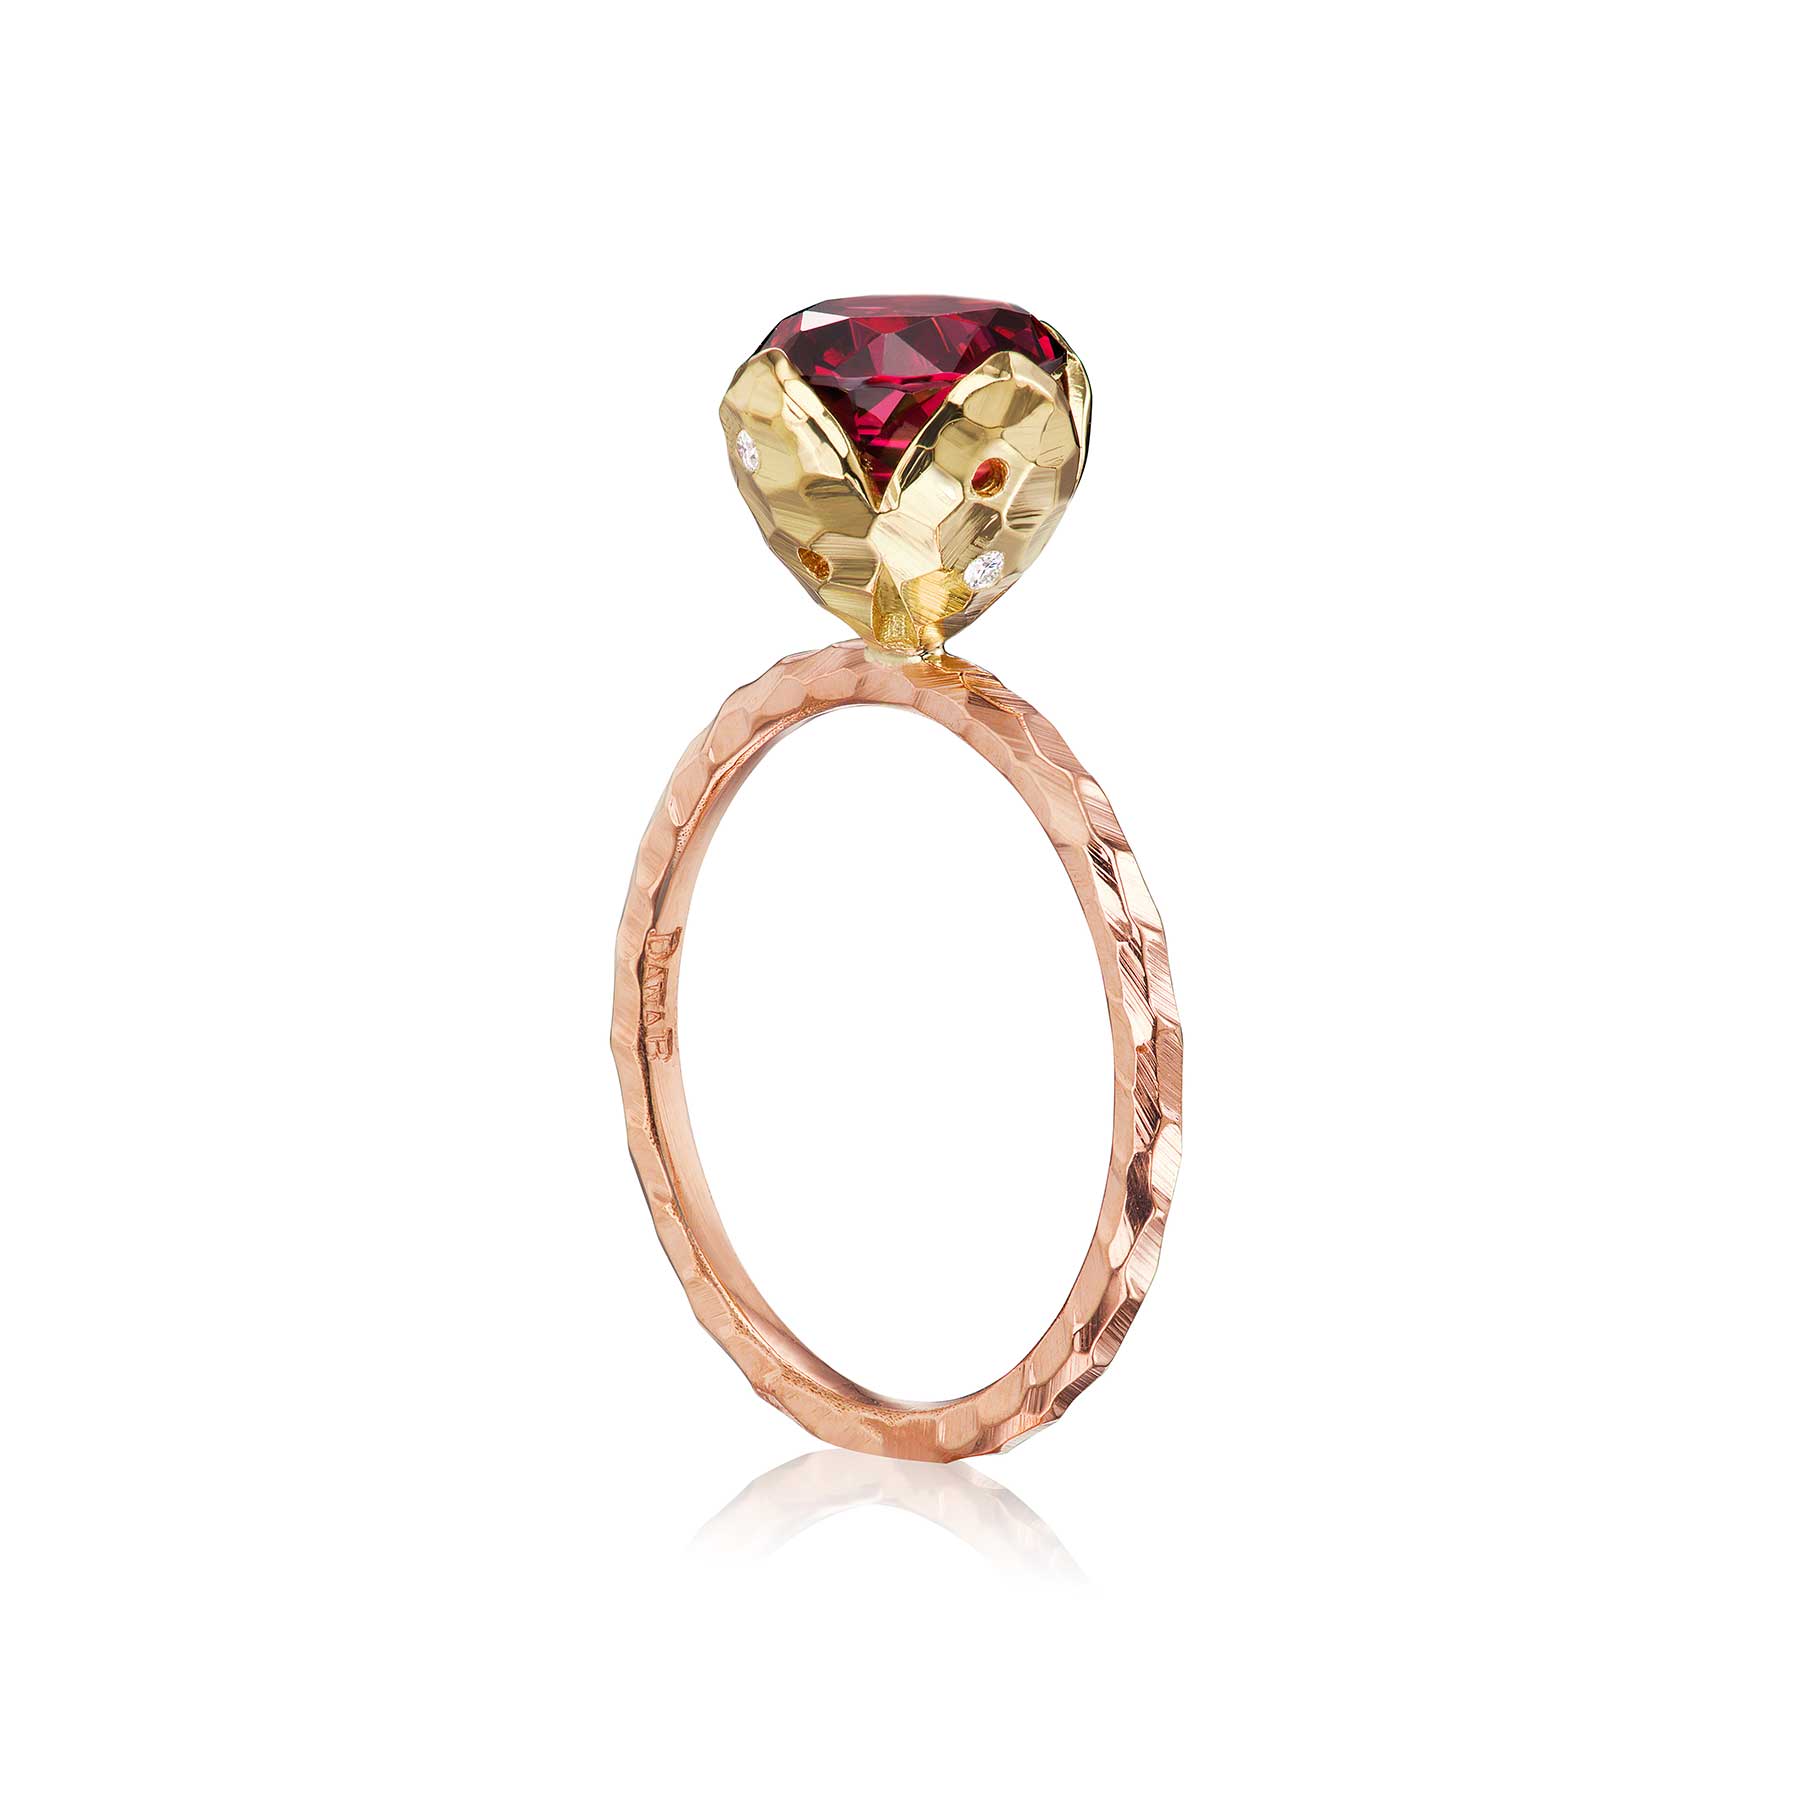 Rose and Yellow Petal-Set Solitaire Ring with Rhodolite Garnet